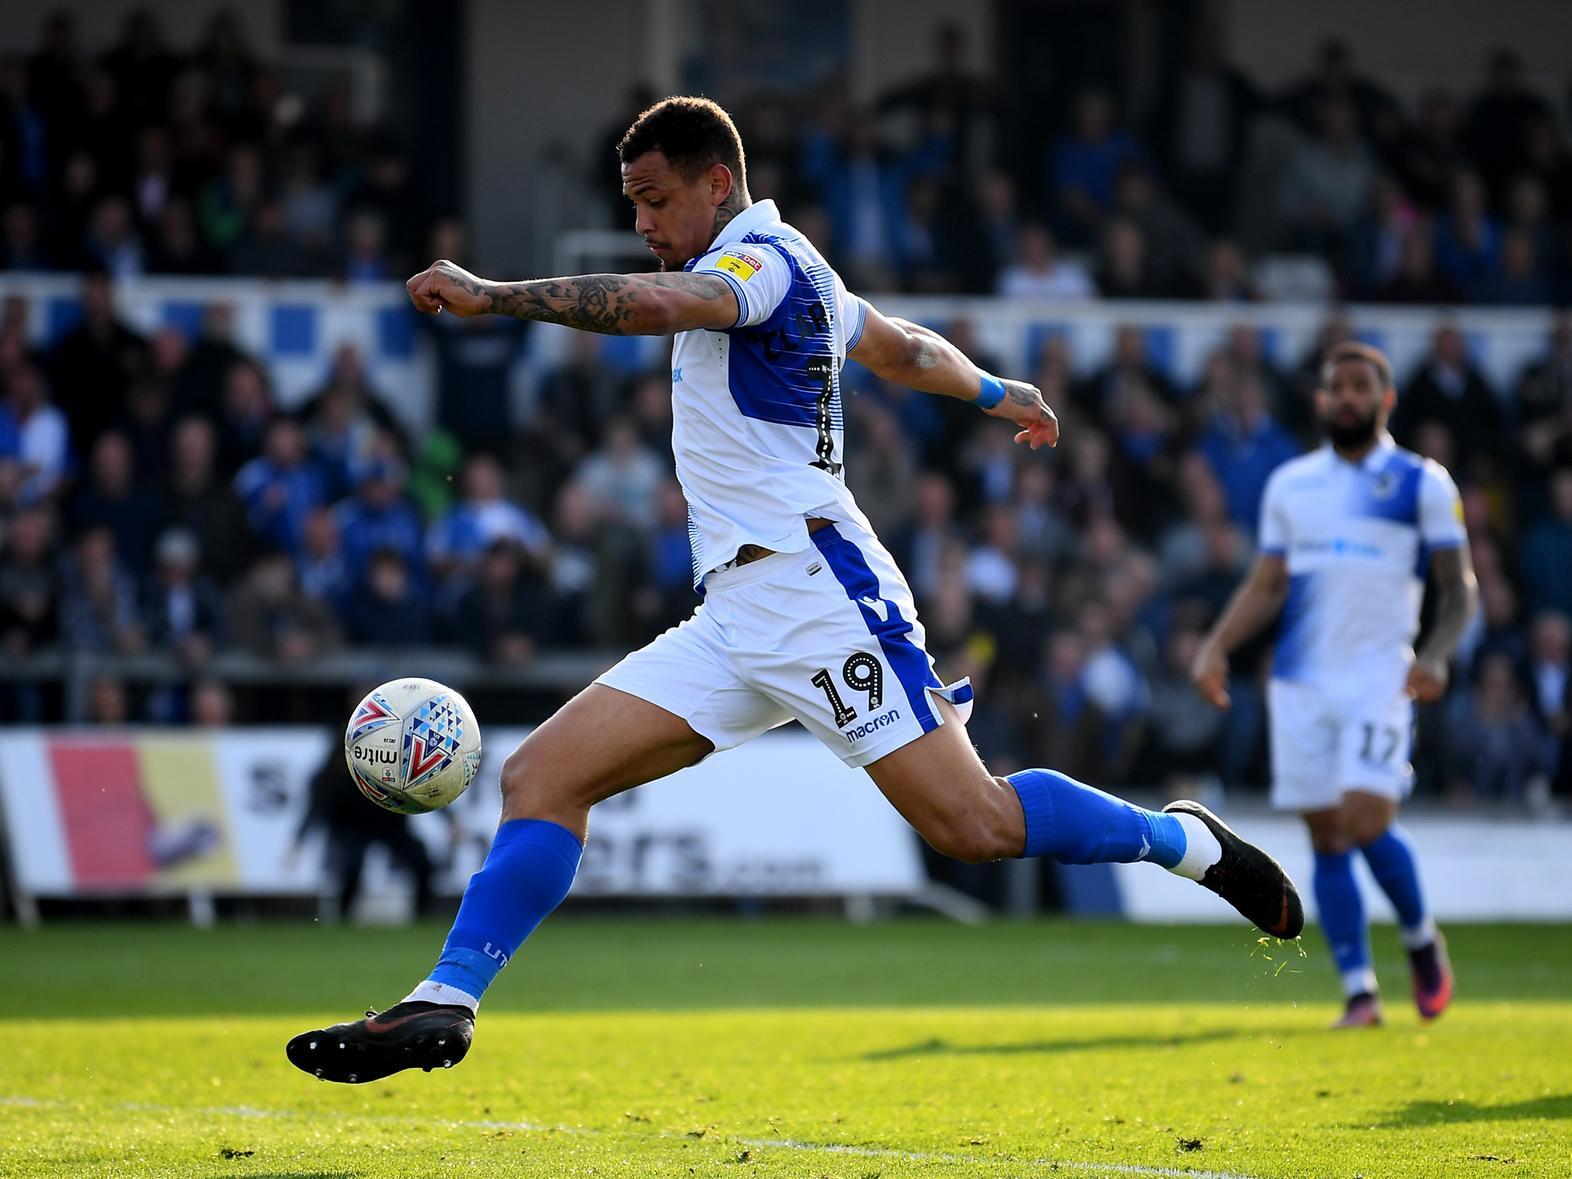 Sheffield Wednesday have been linked with a January swoop for Bristol Rovers striker Jonson Clarke-Harris, who has netted eight goals in 11 starts so far this season. (Bristol Post)